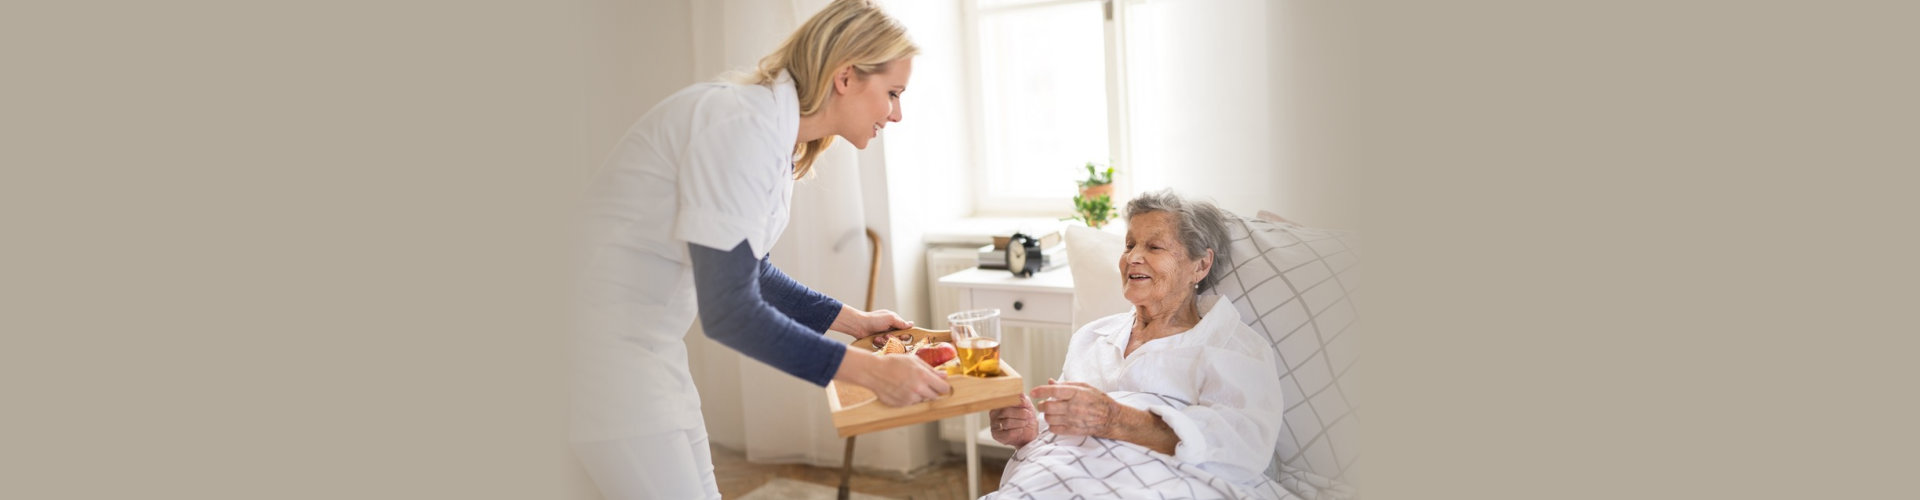 young health visitor bringing breakfast to a sick senior women